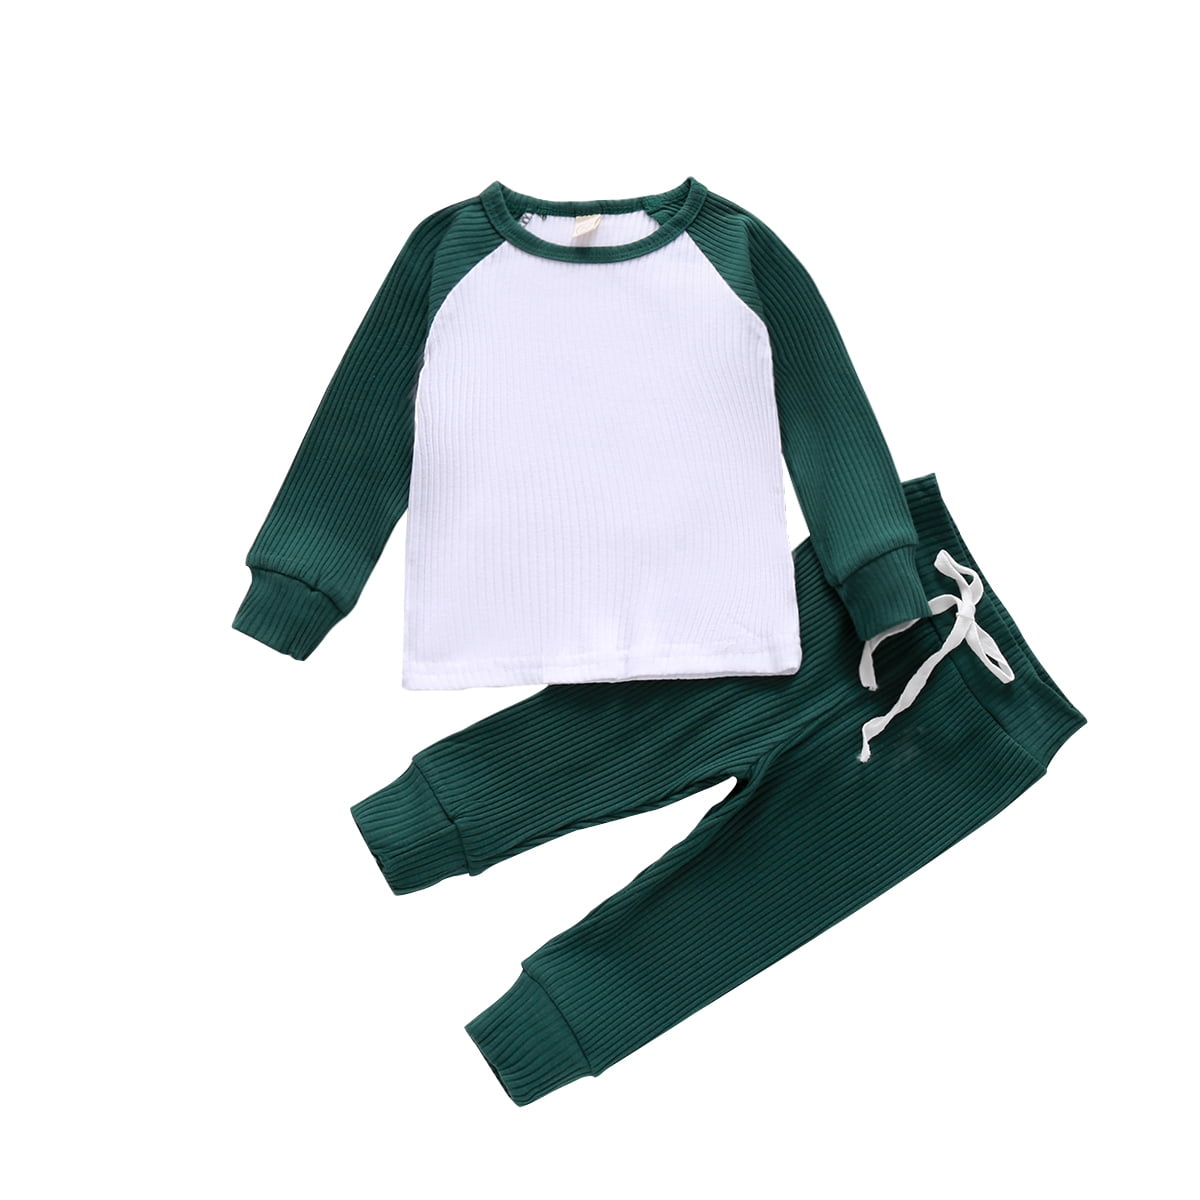 Toddler Baby Girl Boy Clothes Set Ribbed Long Sleeve T-Shirt Tops Pants Unisex Infant Cotton Fall Outfits